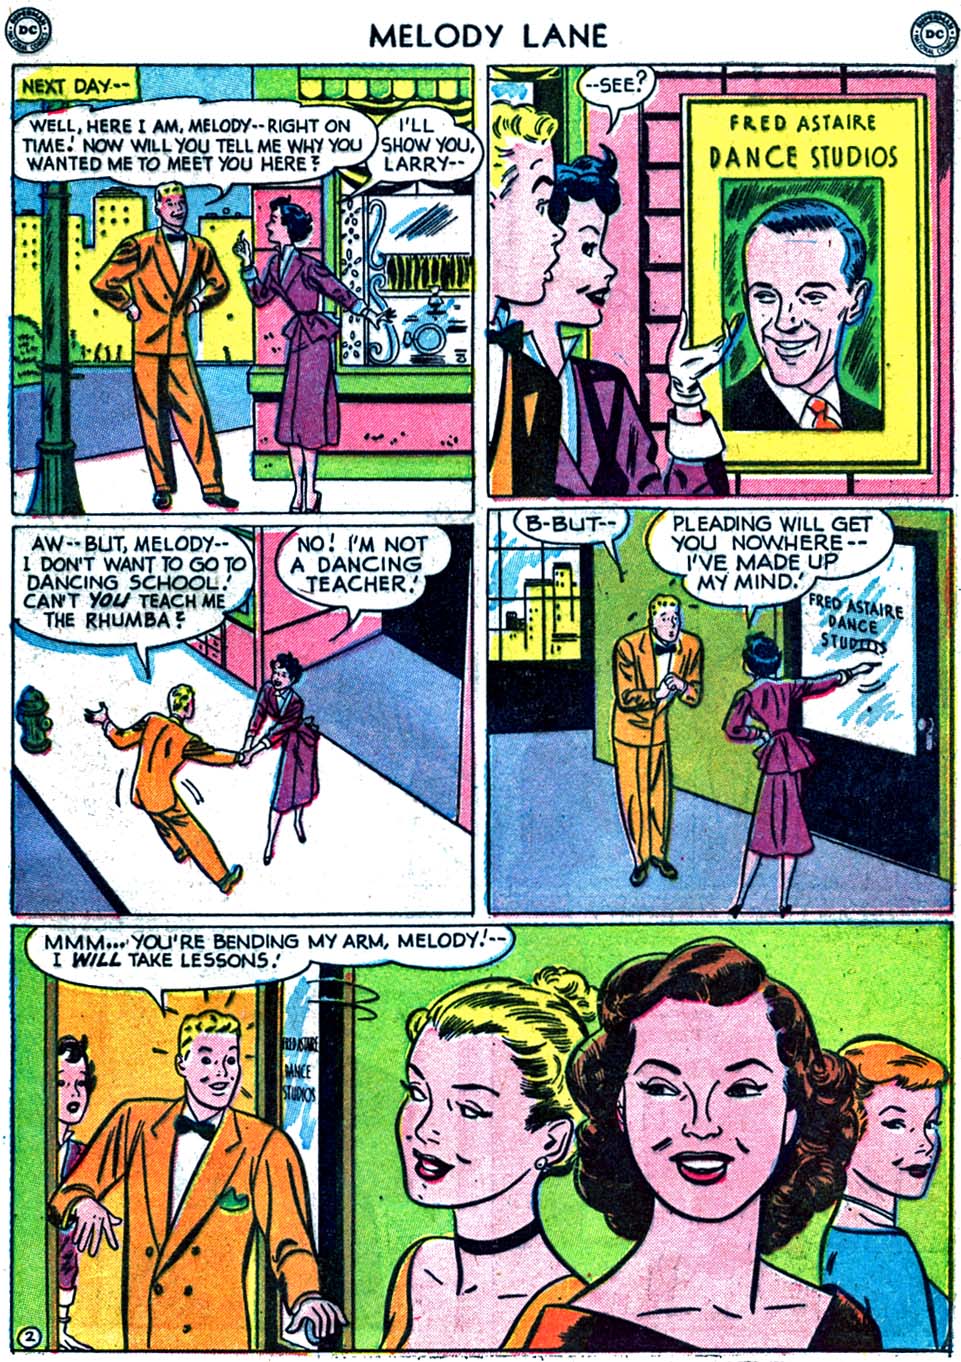 Read online Miss Melody Lane of Broadway comic -  Issue #2 - 43